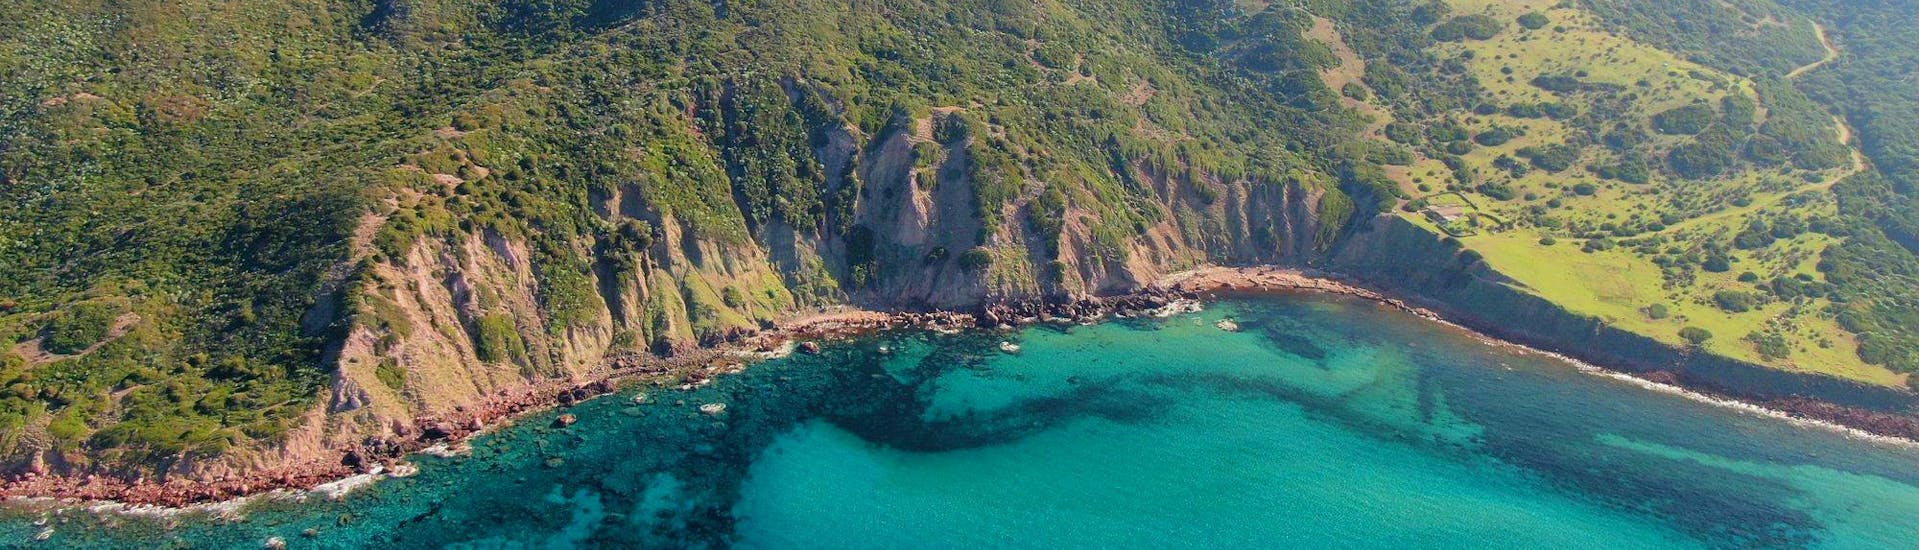 Incredible photo of the Porte Conte Park coastline visited during a private sailing trip from Alghero to Porto Conte Park with lunch with Coral Sail Alghero.